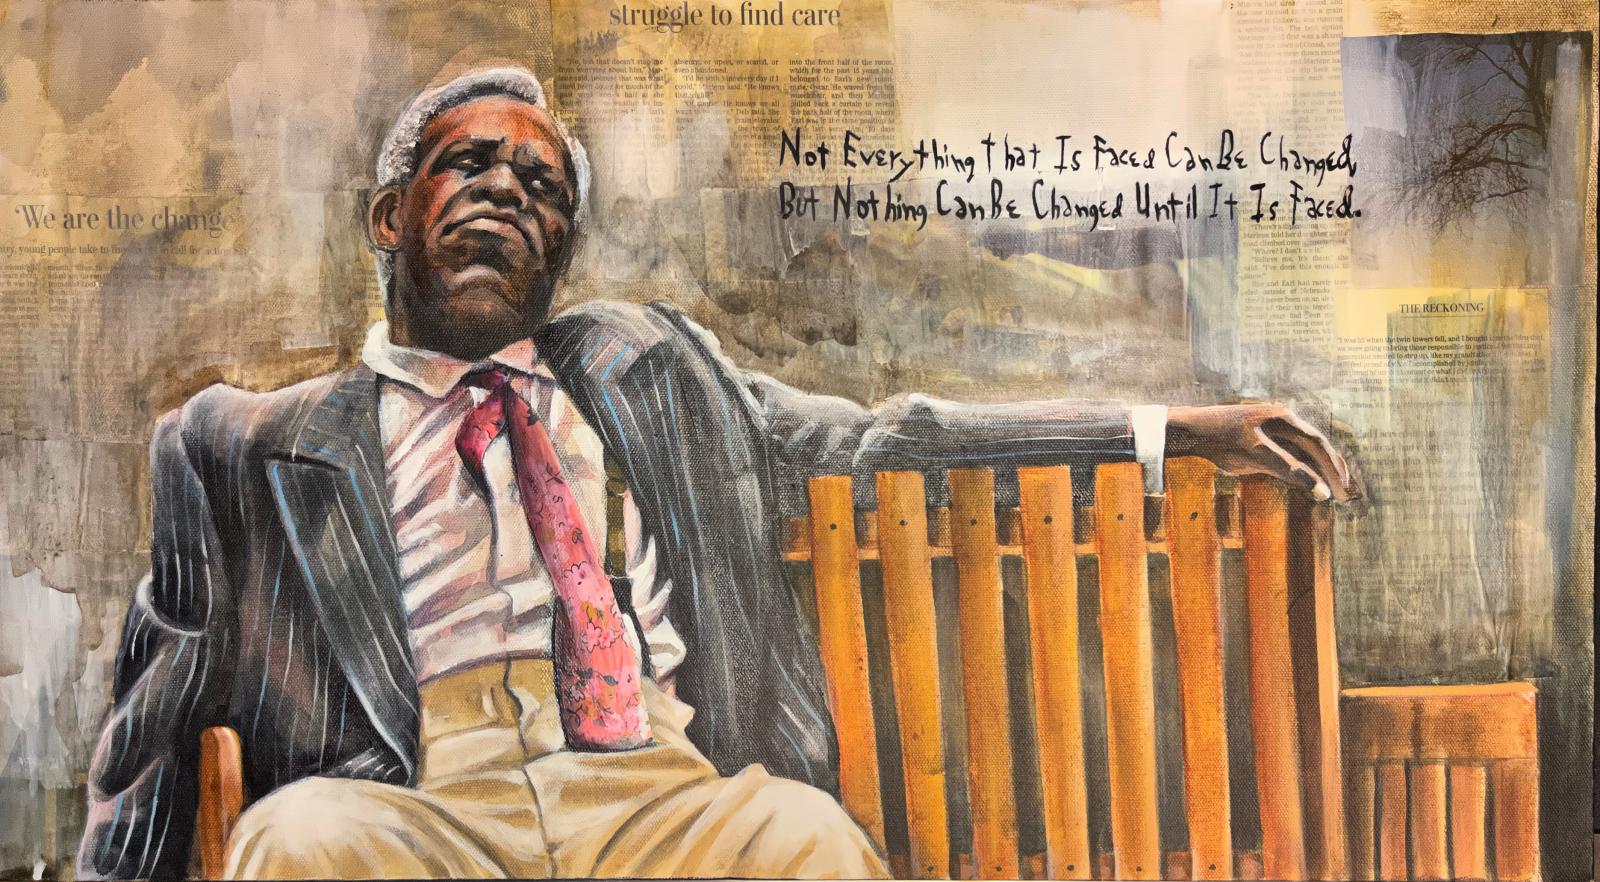 Painting of an old African American man contemplating life and change. Quote by James Baldwin, "not everything that is faced can be changed, but nothing can be changed until it is faced."